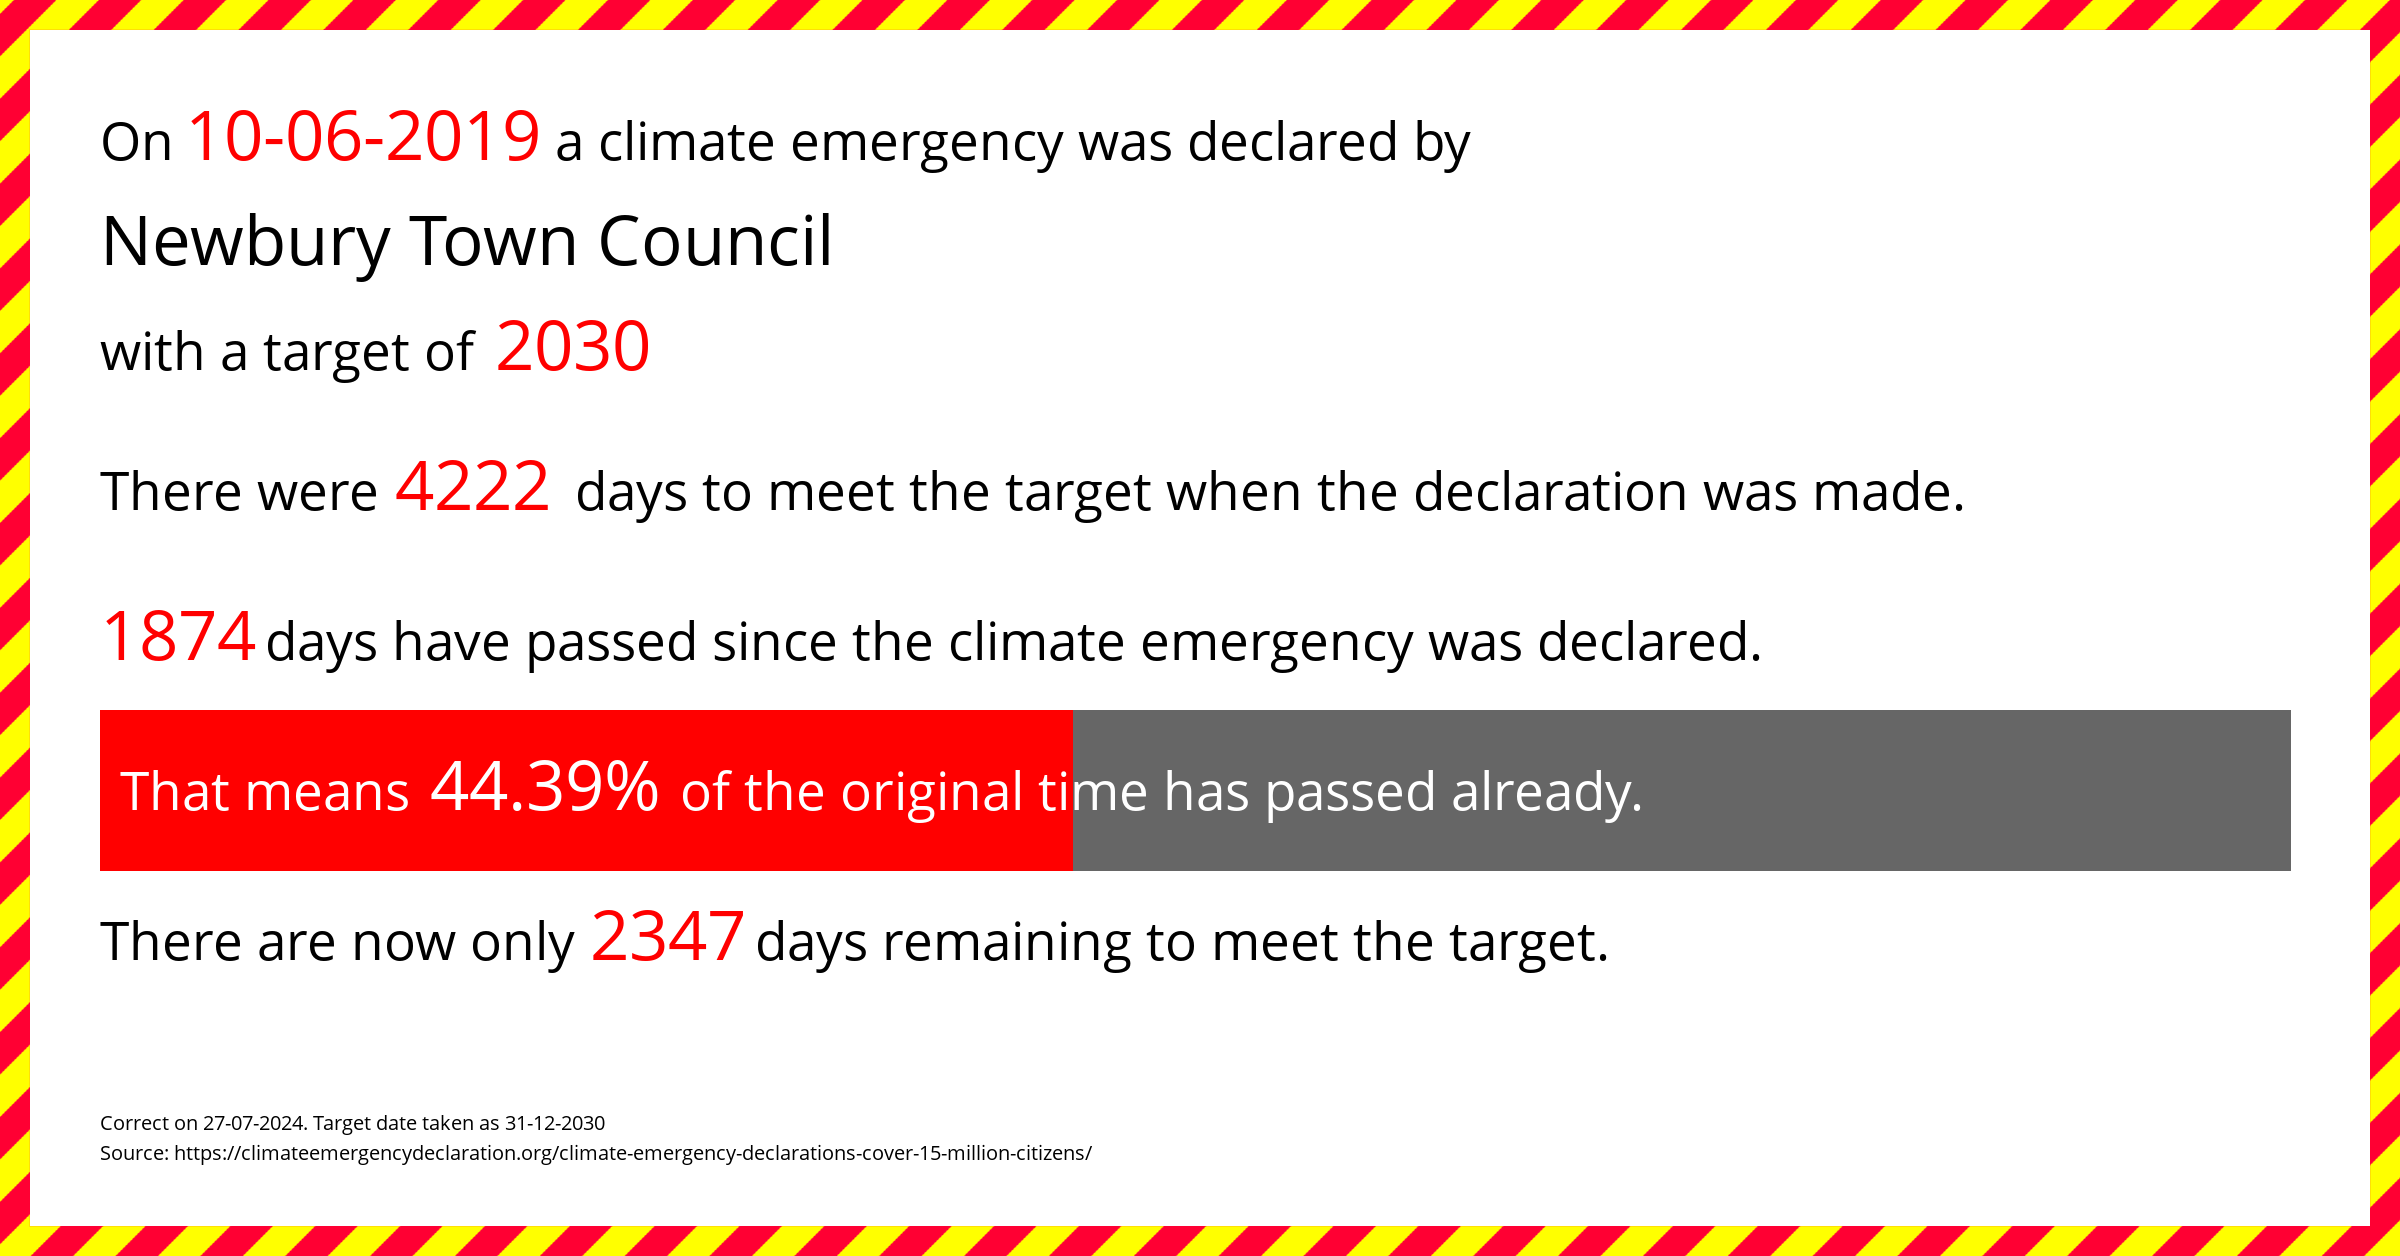 Newbury Town Council declared a Climate emergency on Monday 10th June 2019, with a target of 2030.